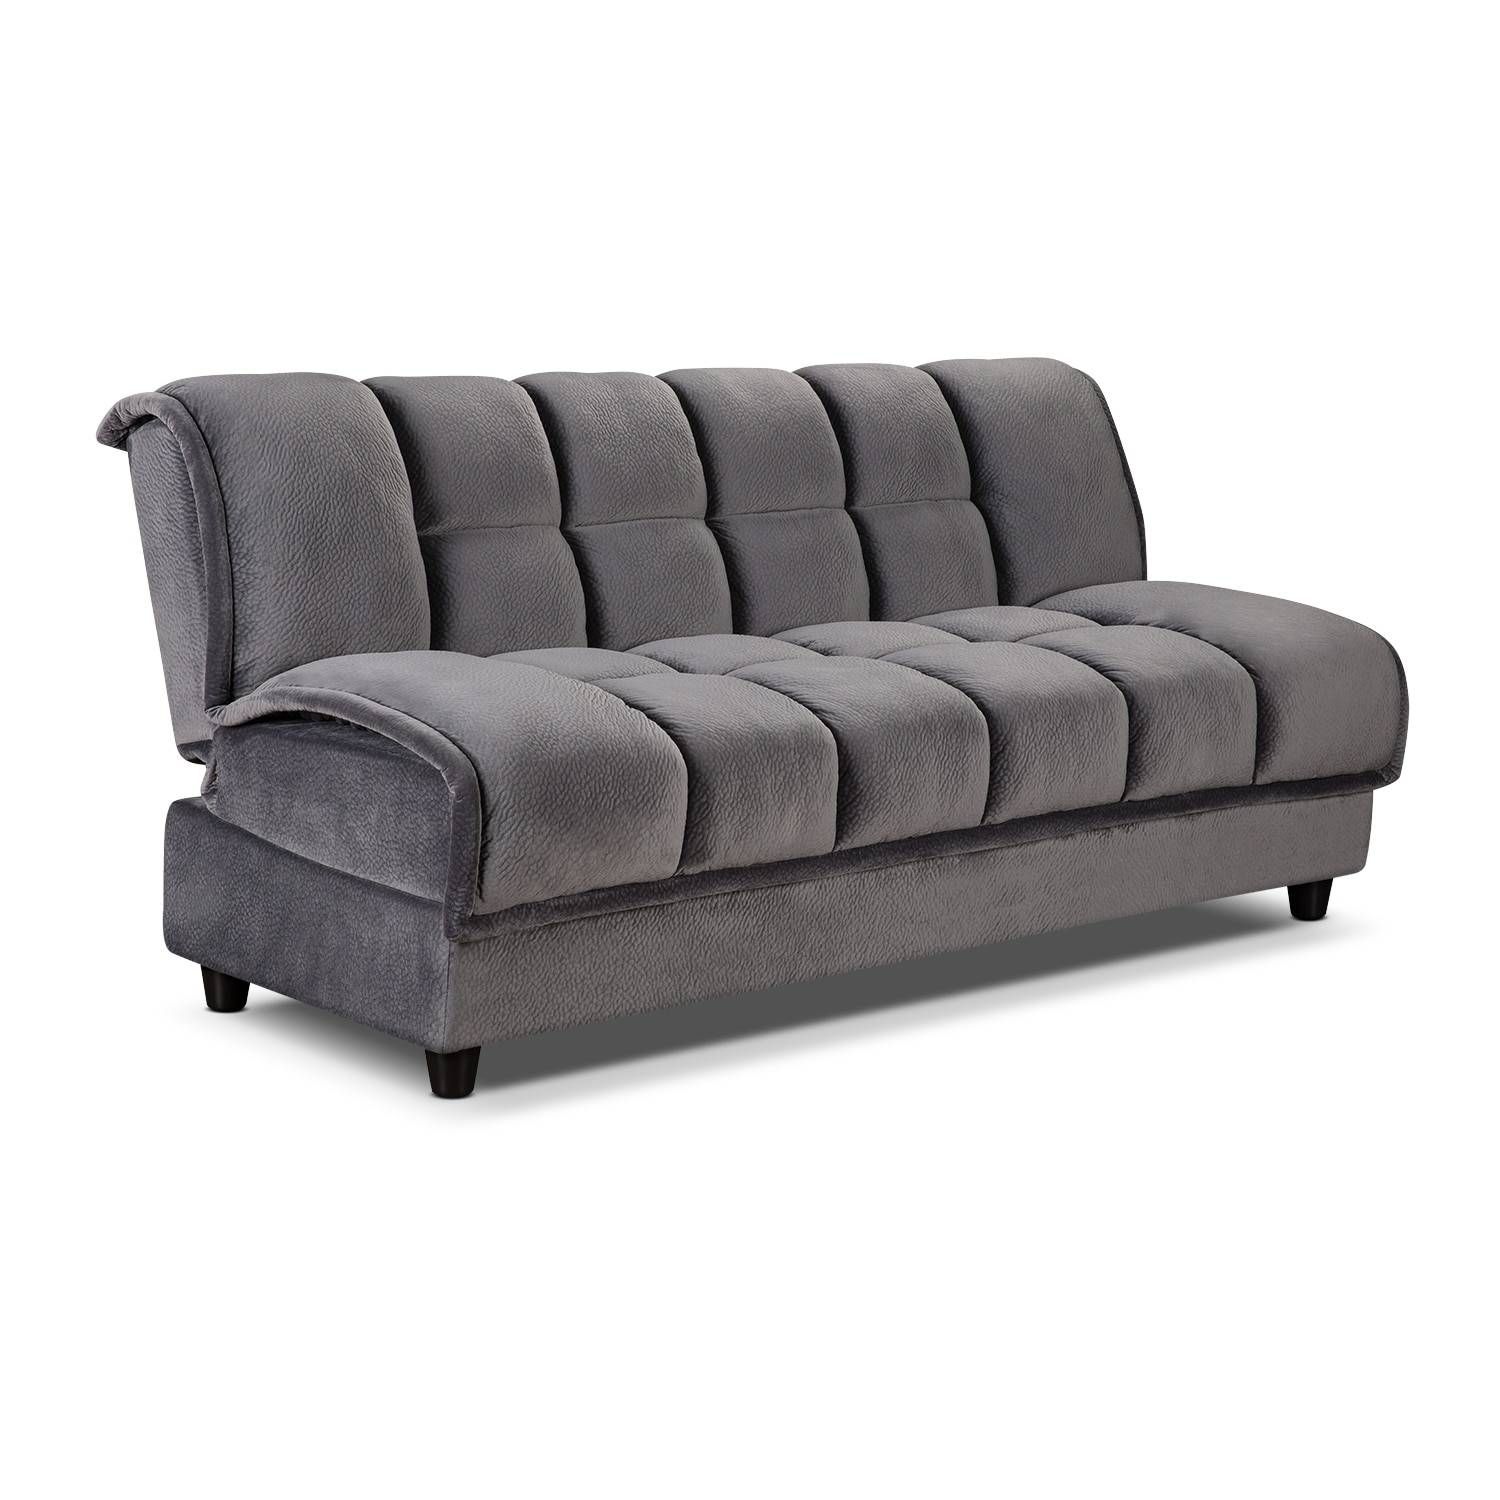 Bennett Futon Sofa Bed – Gray | American Signature Furniture Within Fulton Sofa Beds (View 30 of 30)